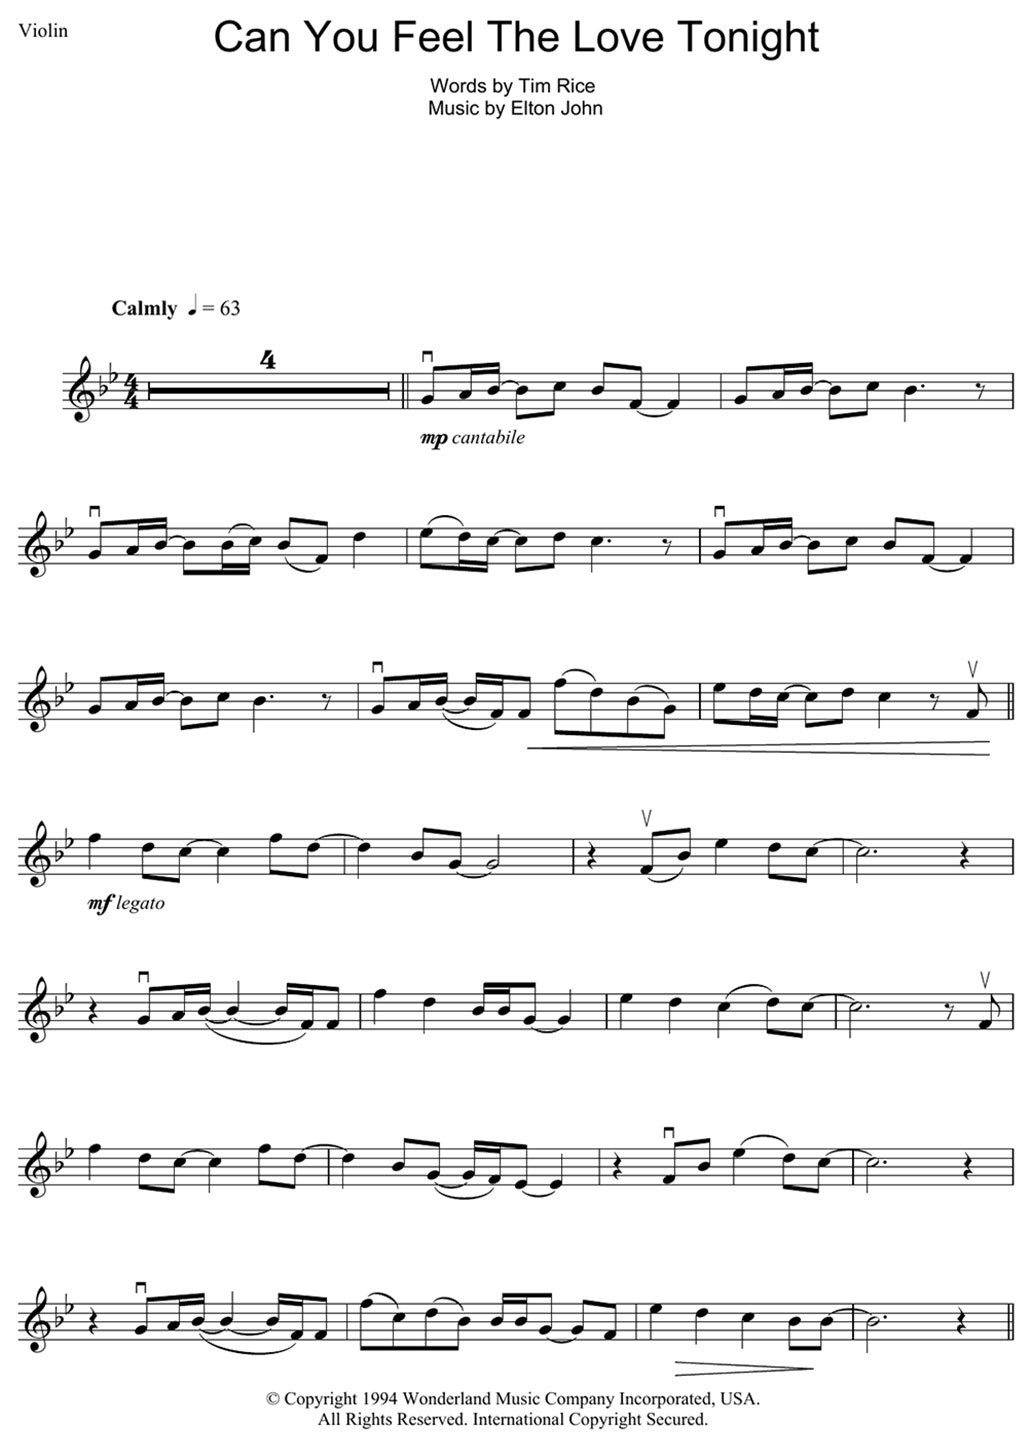 can you feel the love tonight sheet music notes